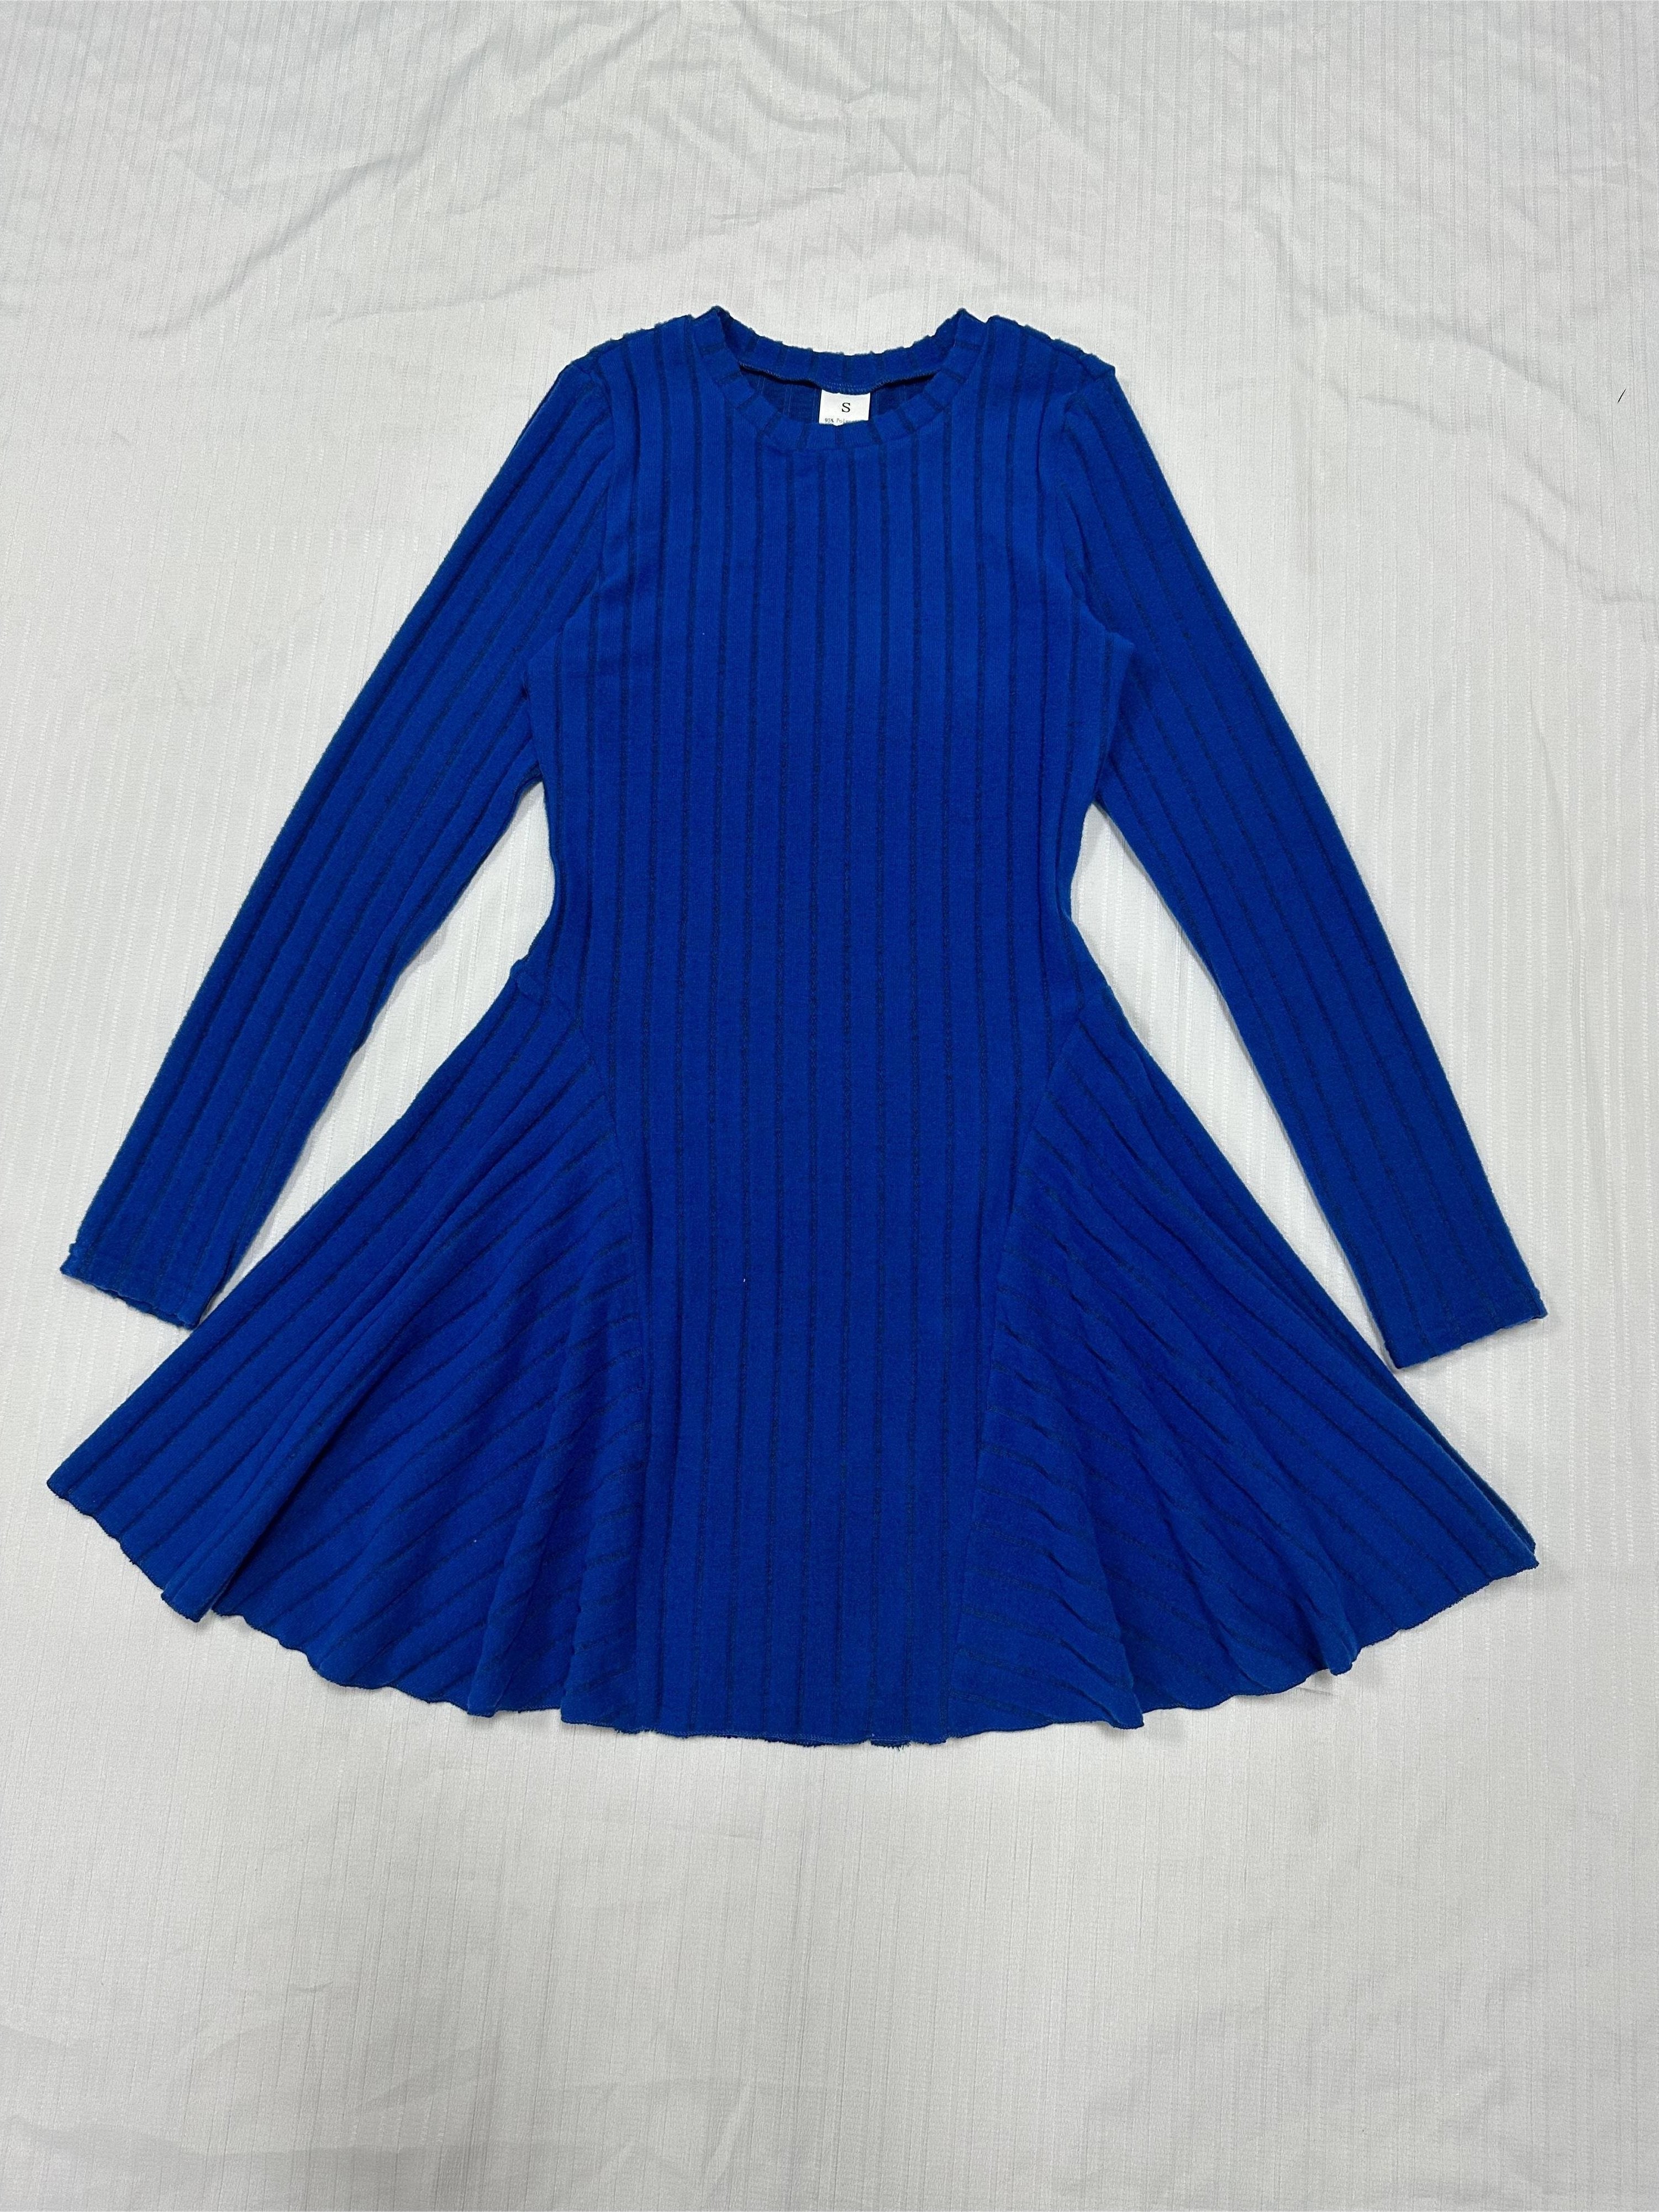 Rib Knit Long Sleeve Flare Dress, Casual Crew Neck Dress For Spring & Summer, Women's Clothing